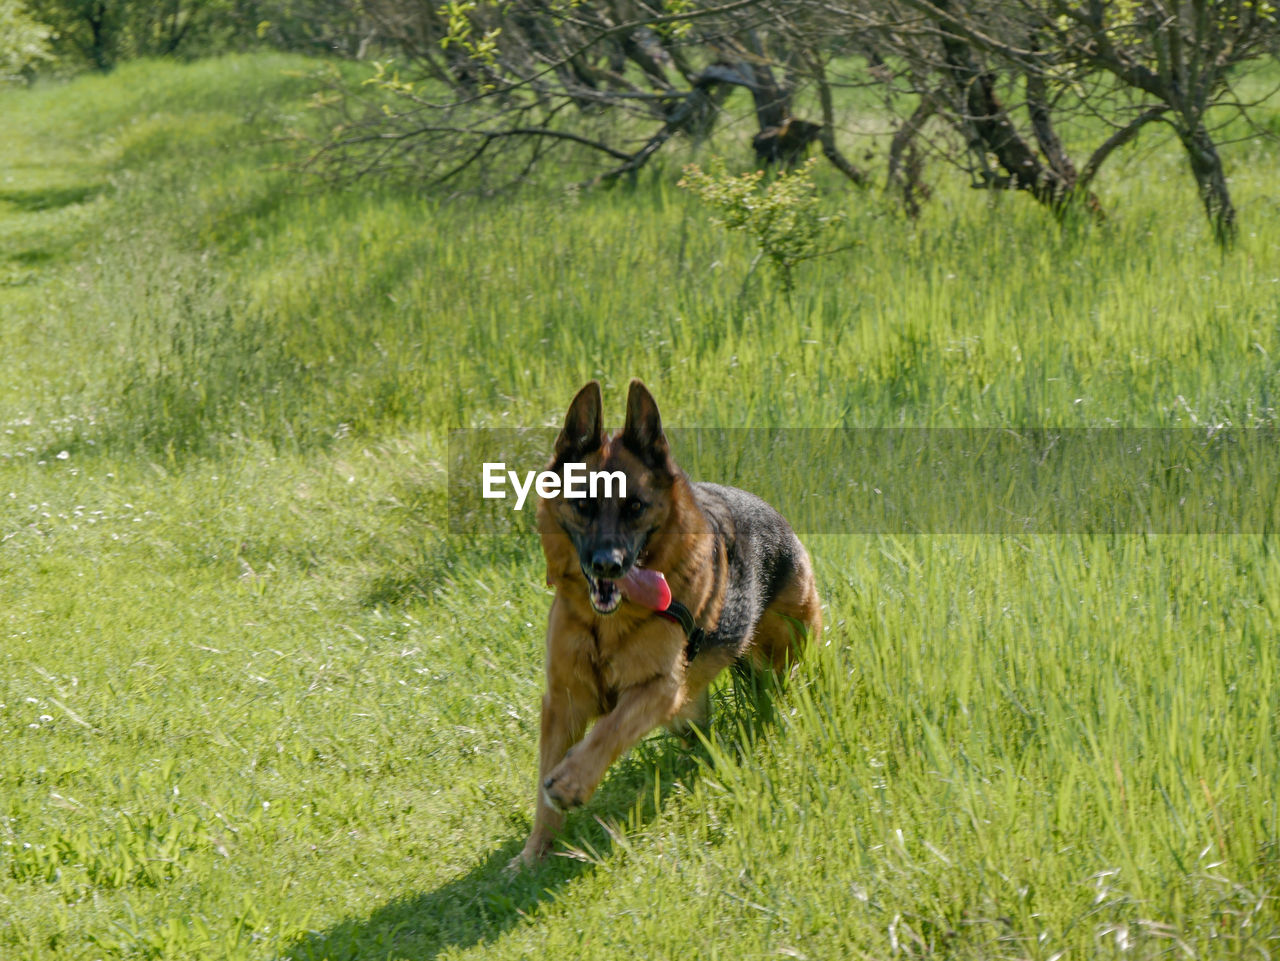 one animal, dog, pet, canine, animal themes, mammal, domestic animals, animal, plant, grass, green, nature, field, growth, land, day, no people, carnivore, sunlight, running, tree, portrait, german shepherd, sticking out tongue, outdoors, lawn, grass area, facial expression